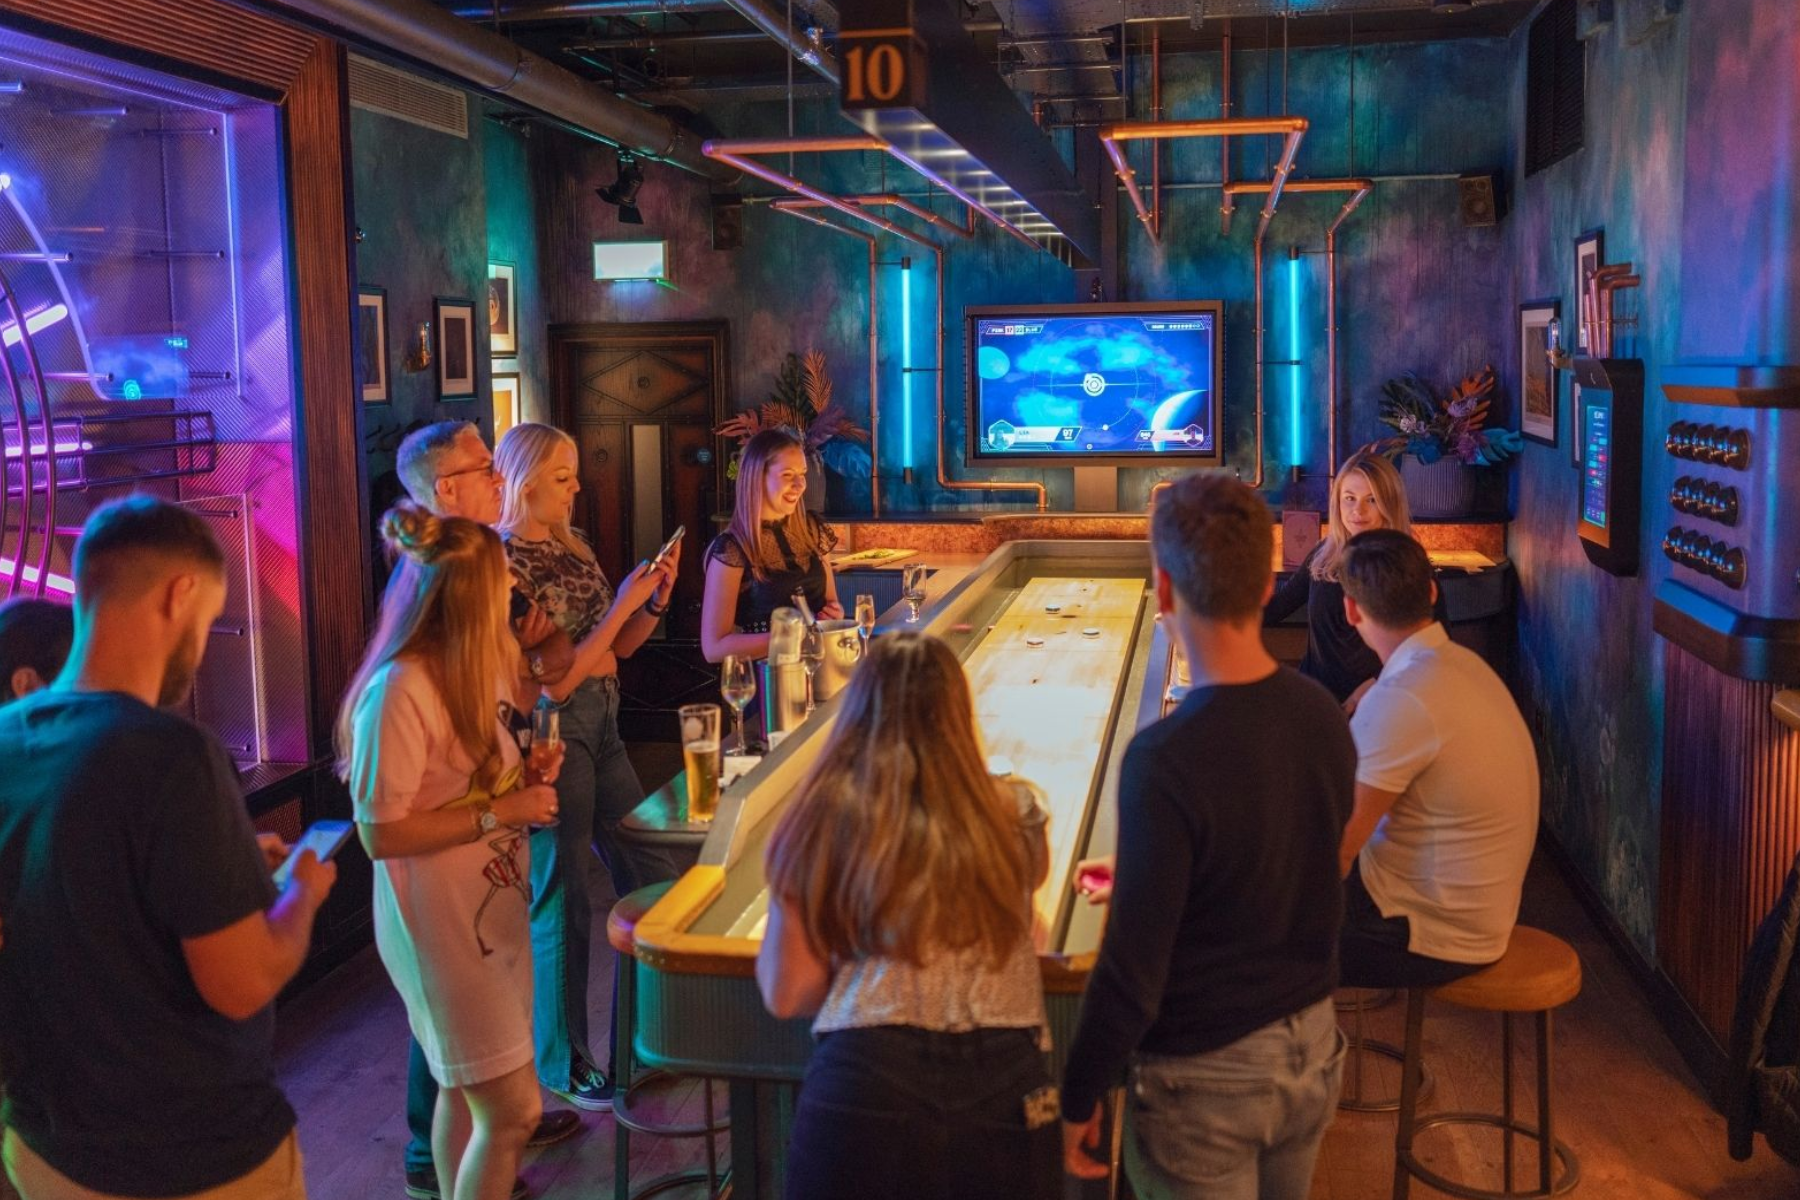 A group of young people playing shuffleboard with automated scoring